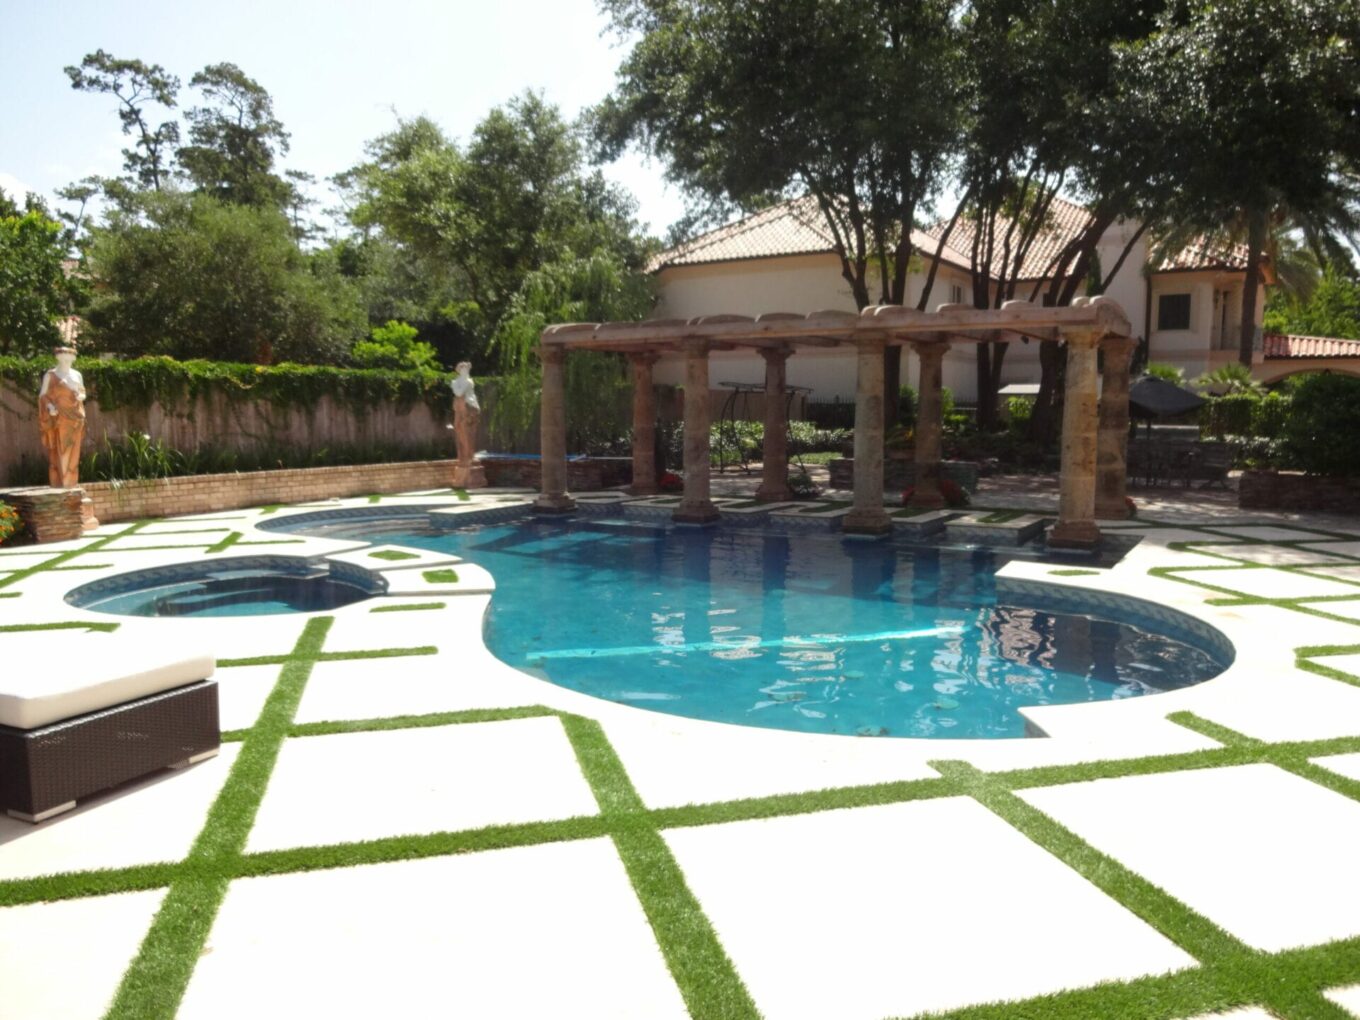 A pool with grass around it and trees in the background.